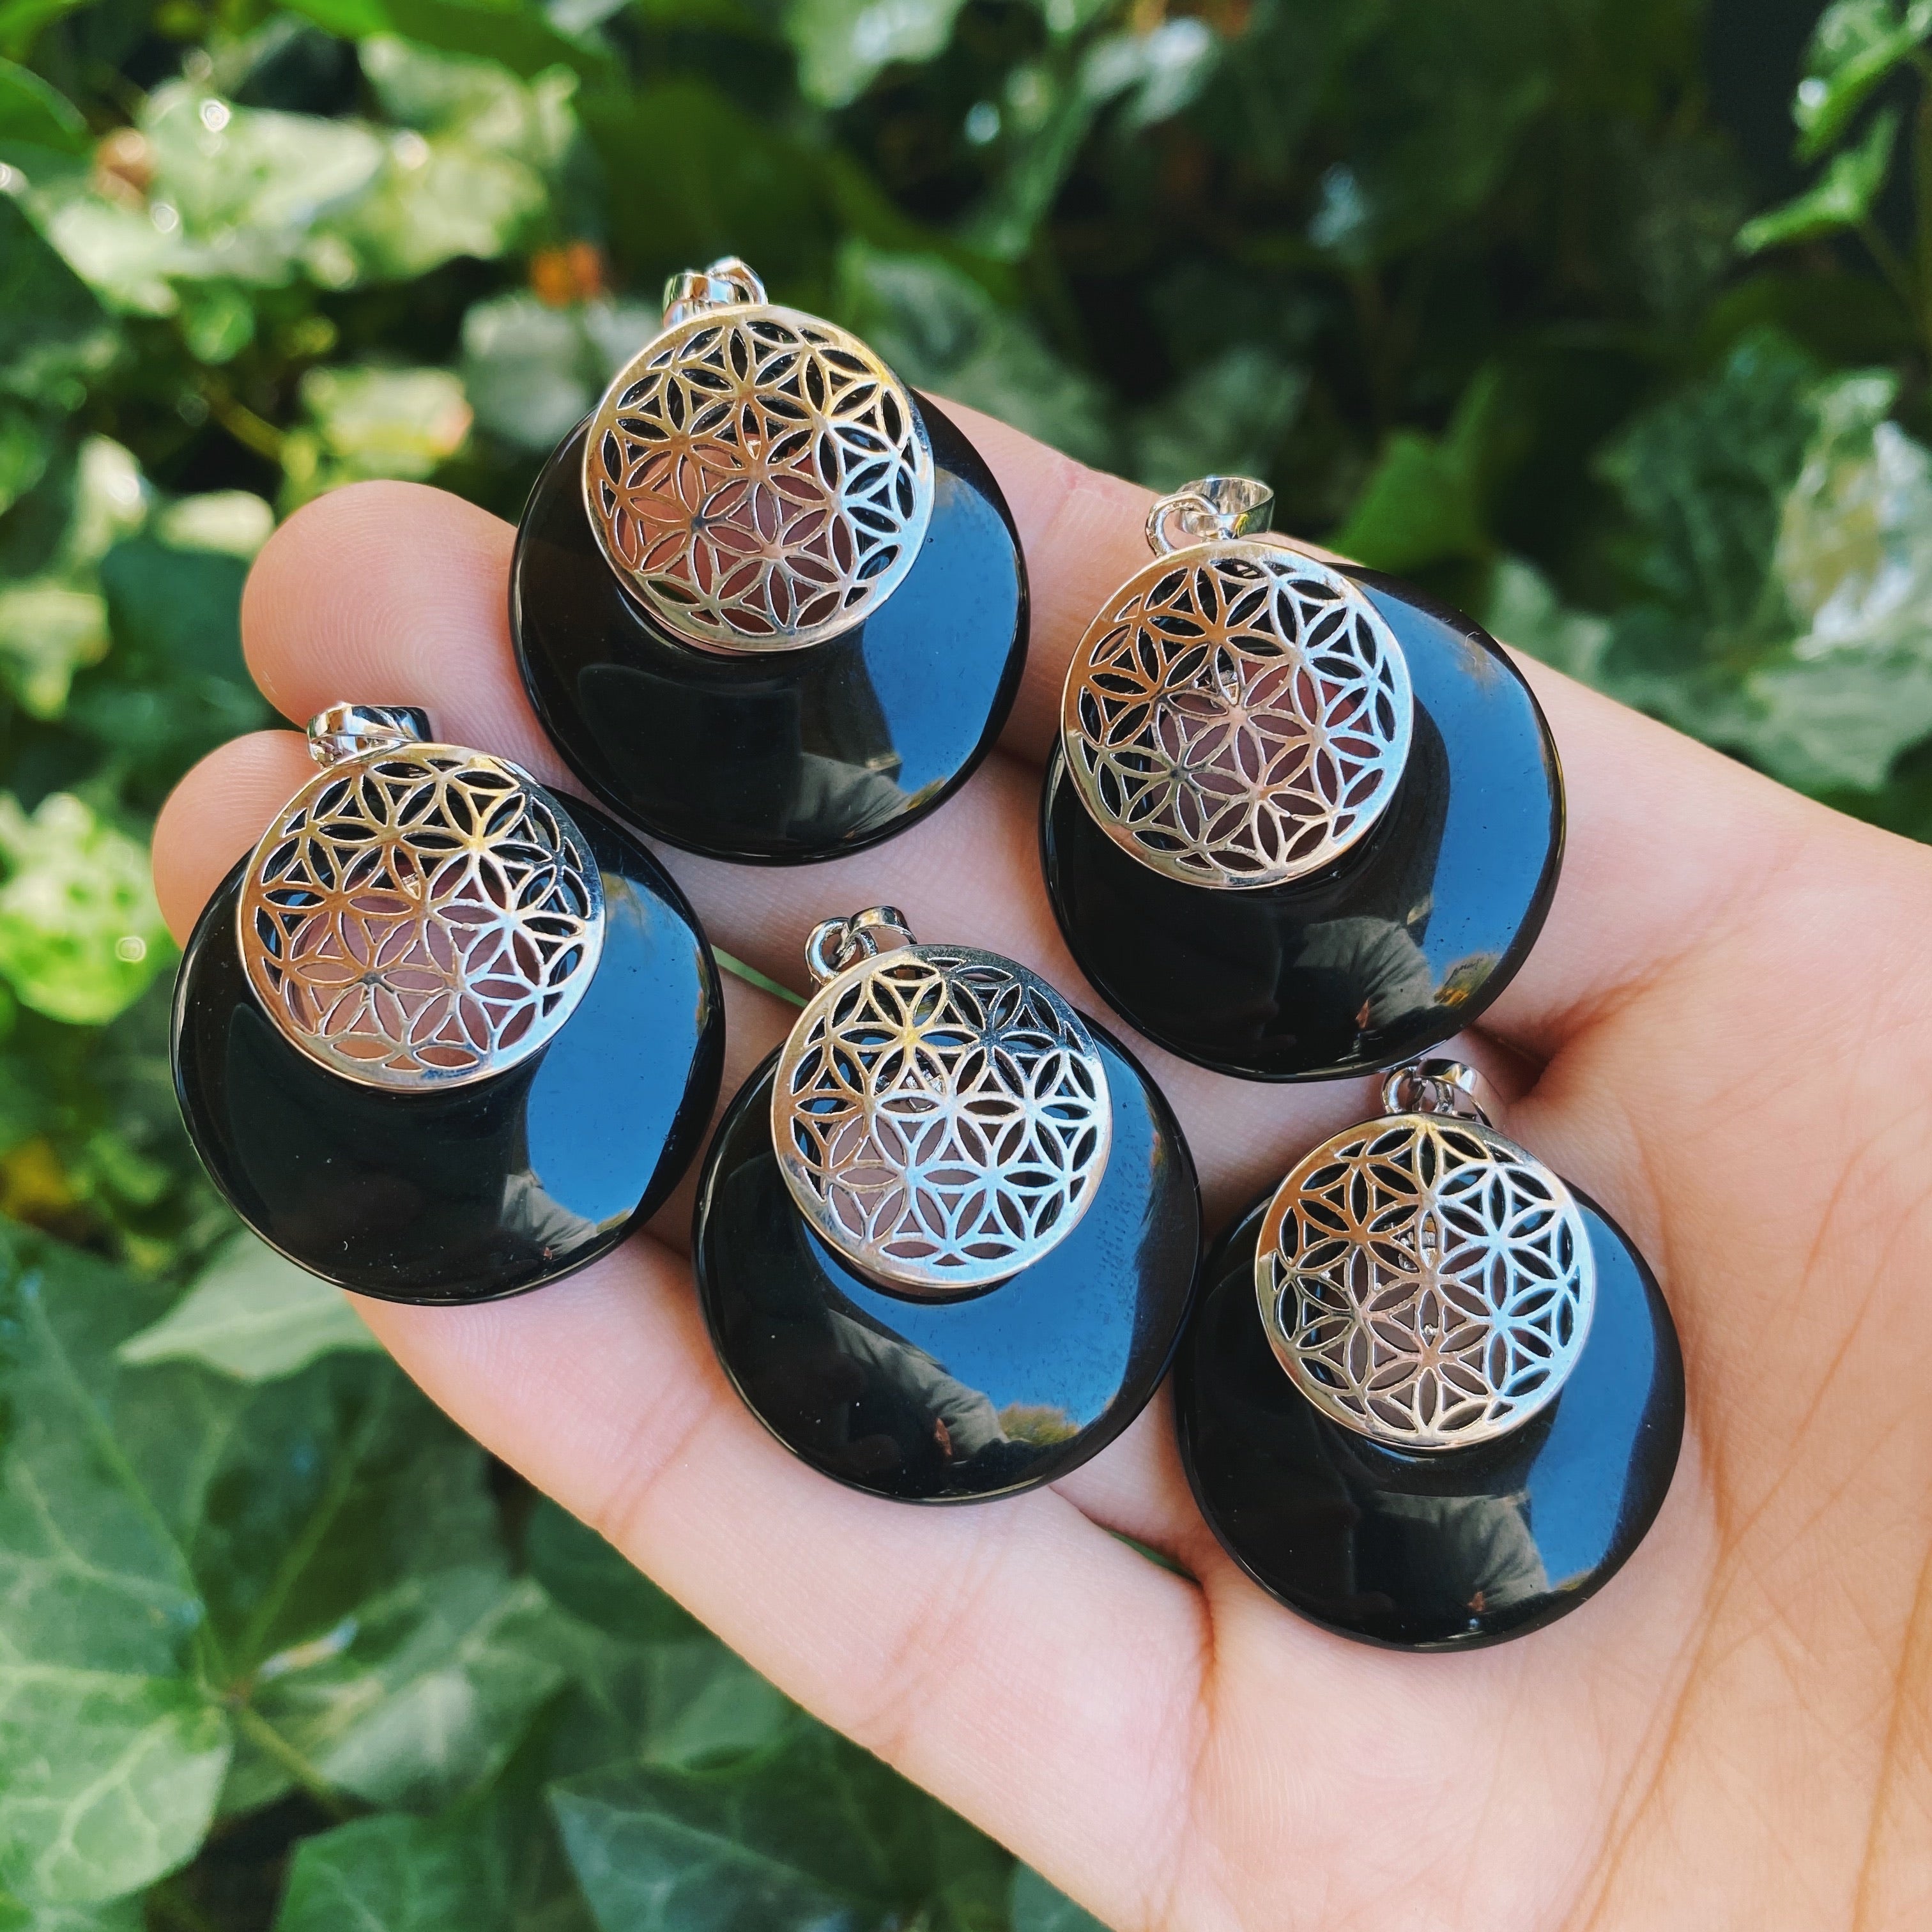 (1) Black Stone Flower Of Life Pendant (CLEARANCE)